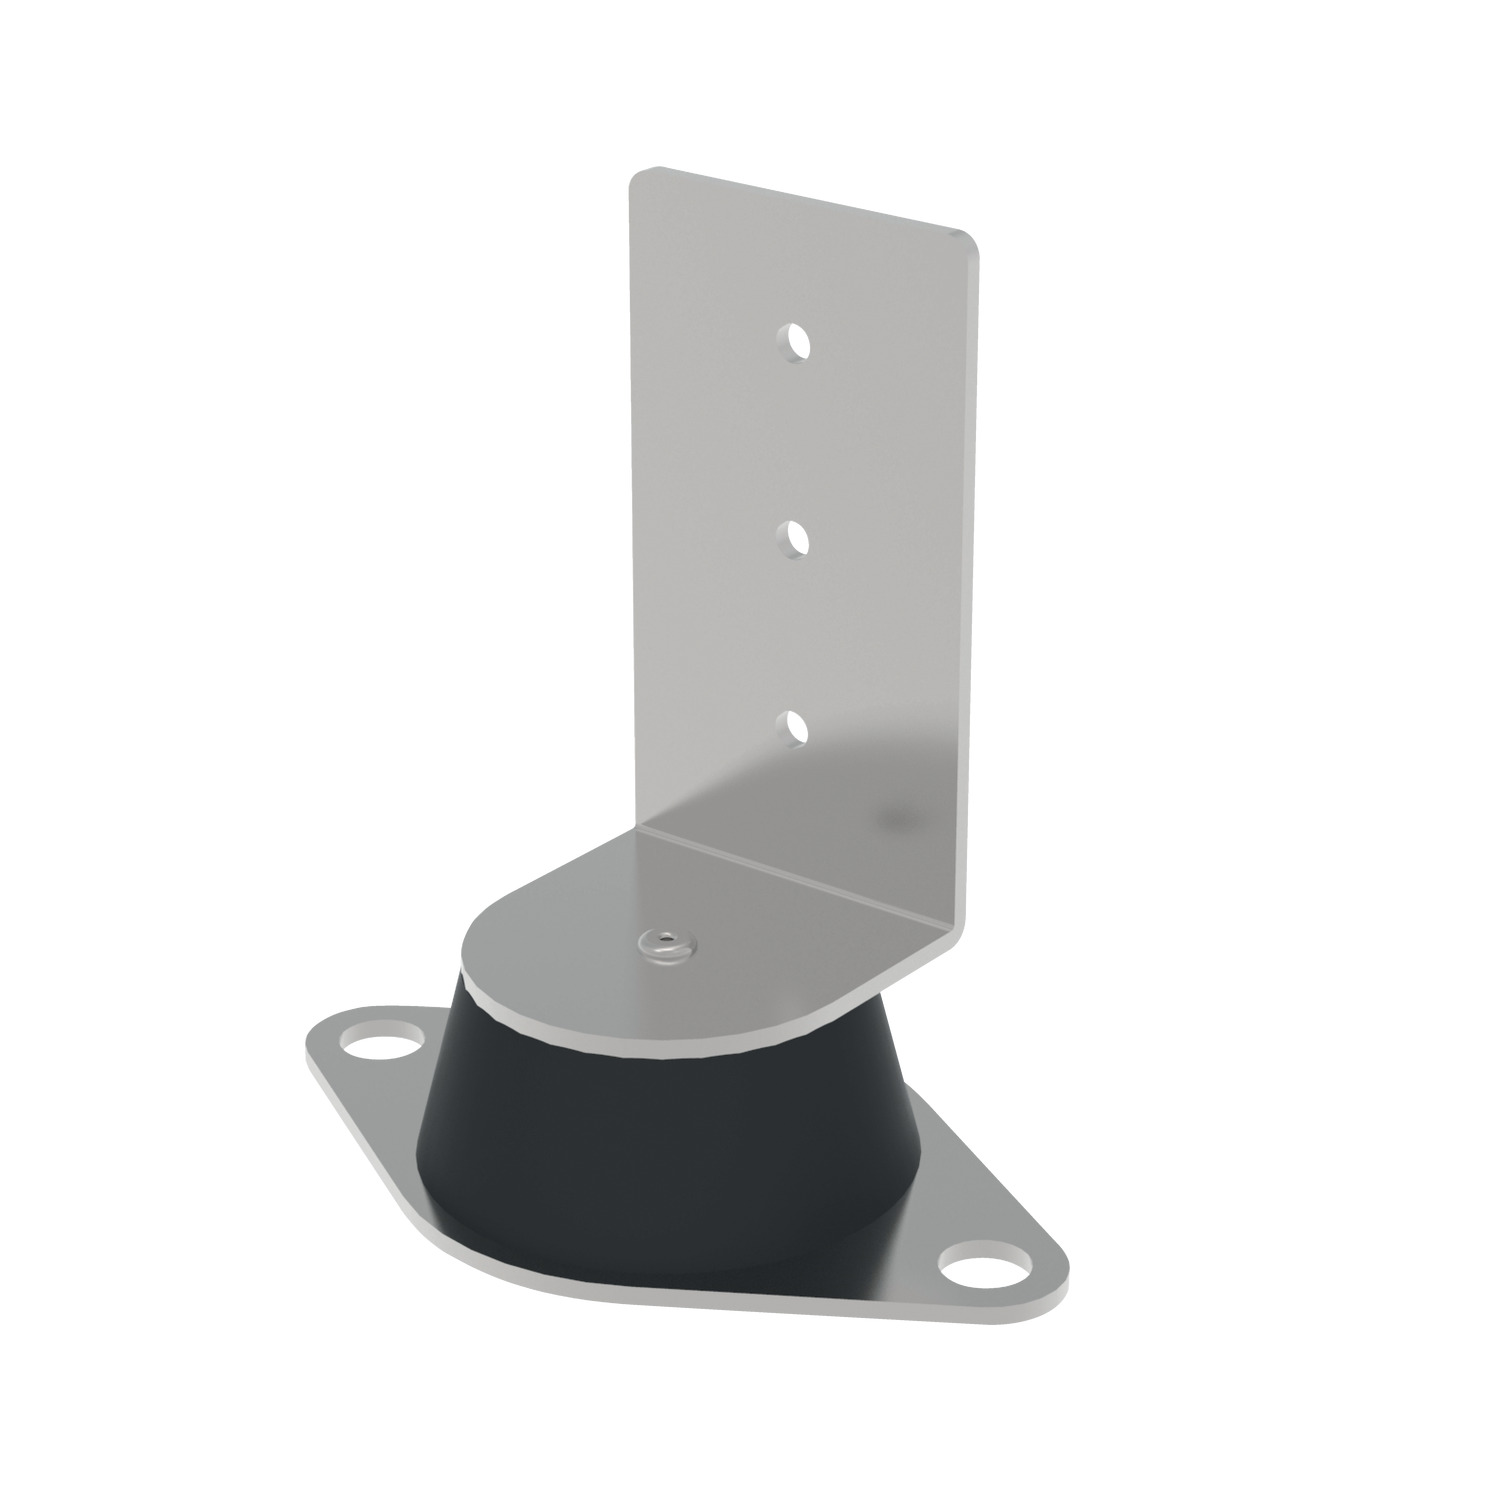 P2556 - Acoustic Wall Damper right angle fixing